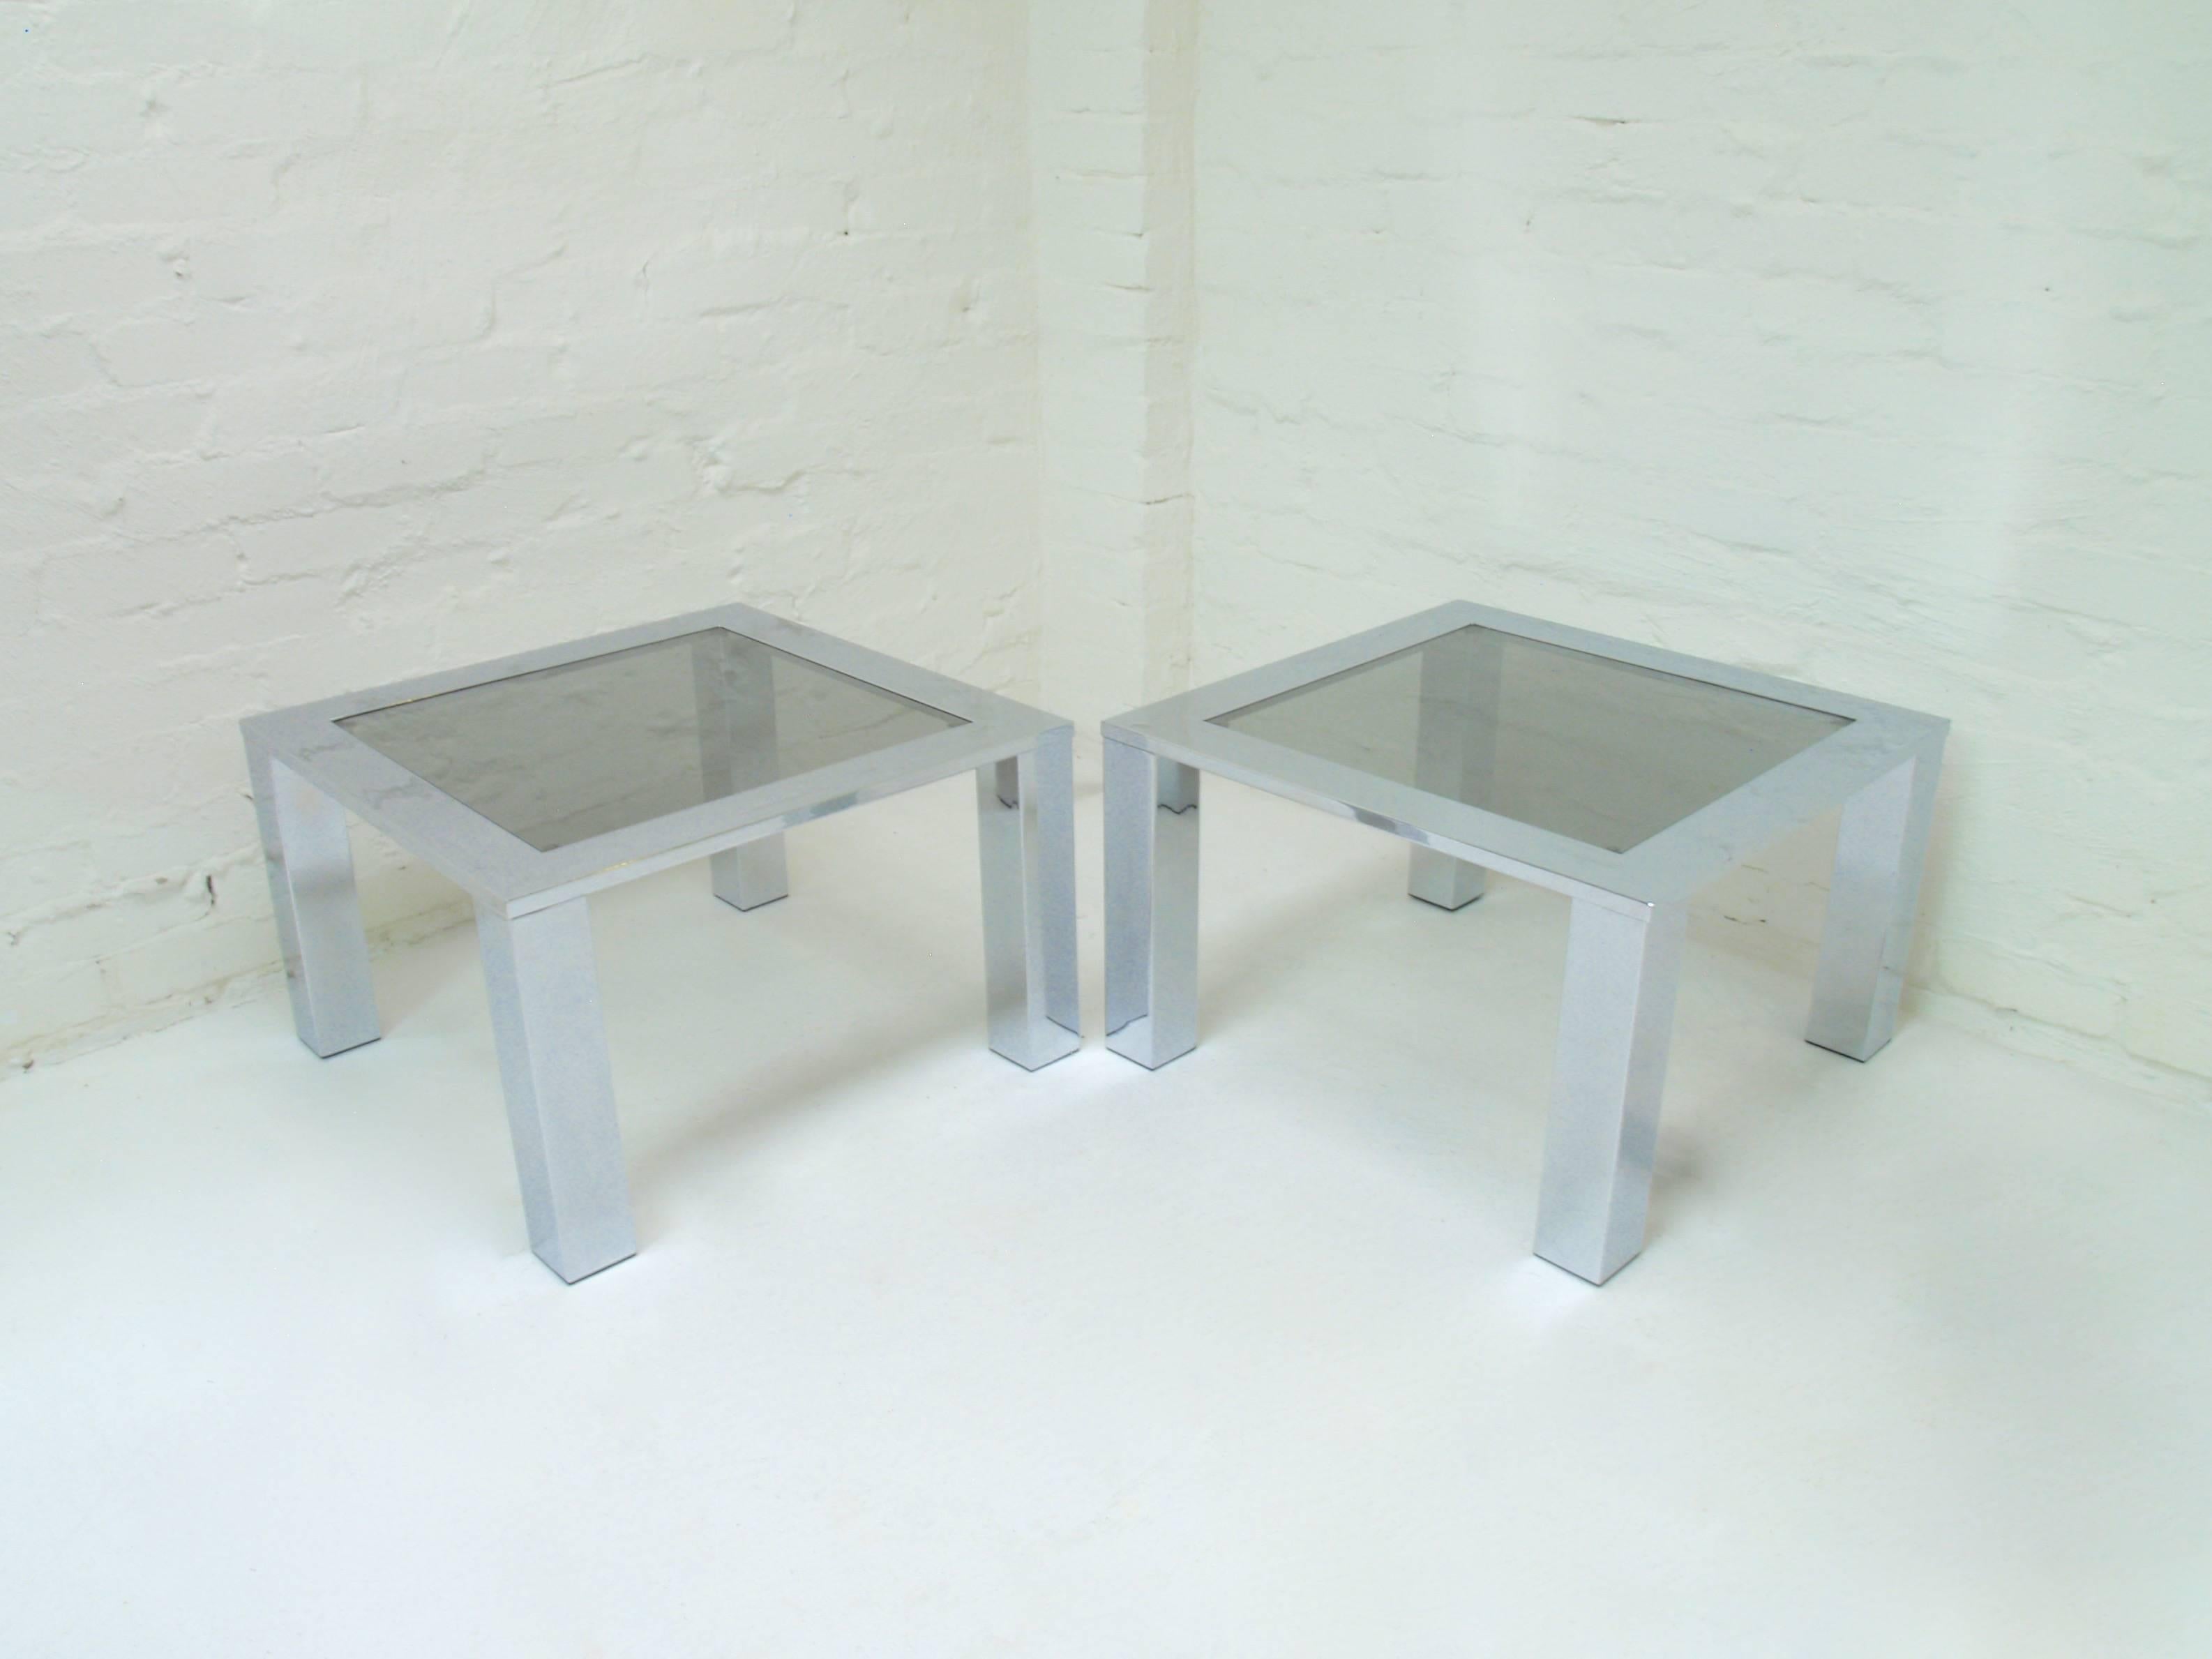 Two available. Price per item. 

Belgo chrome and smoke glass tables dating from the late 1970s. We love their beautifully balanced proportions which show great care in their design and construction. 

These tables came from a magnificent home built